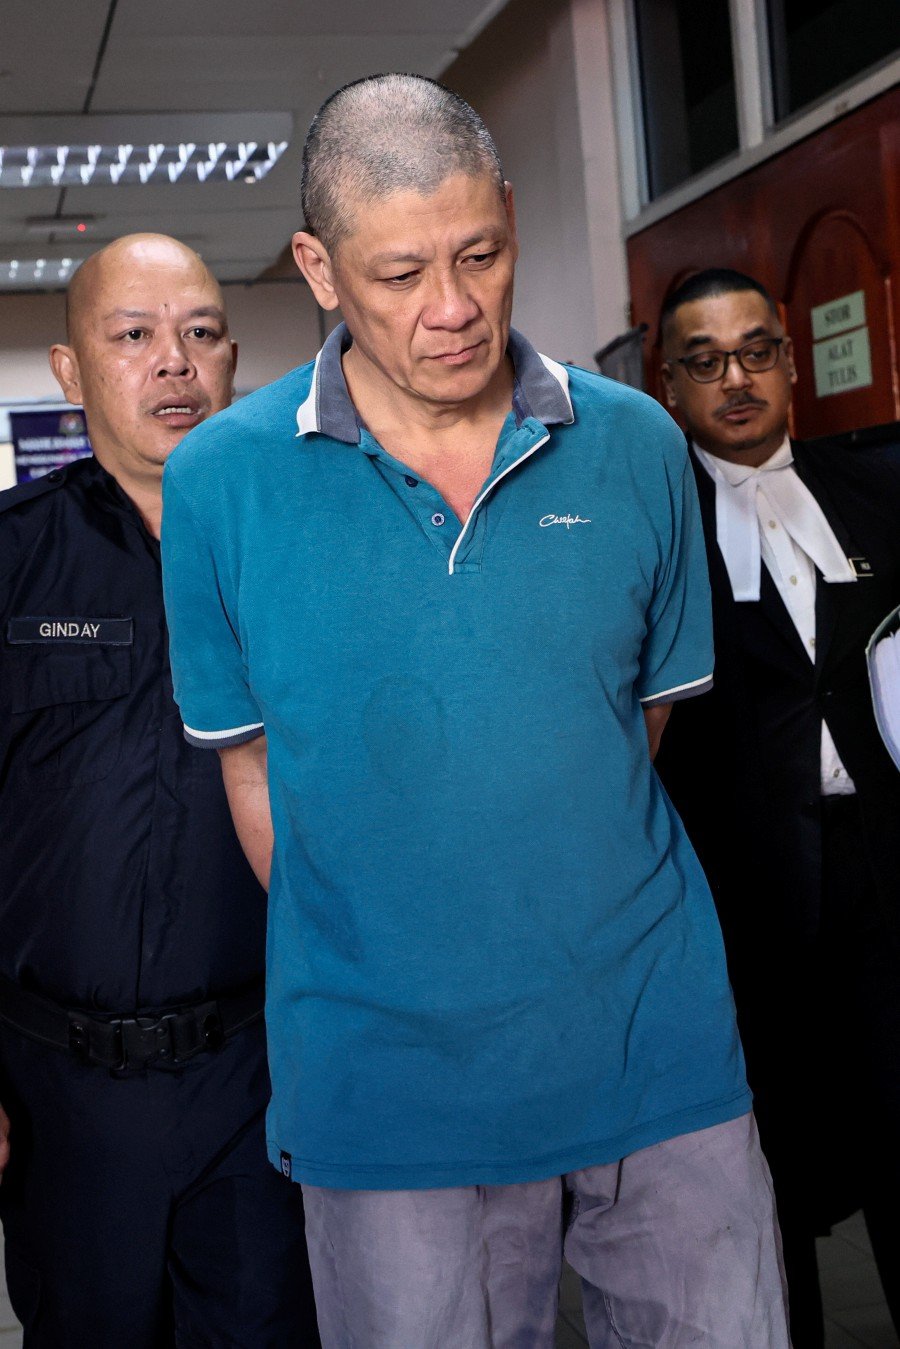 A mechanic was sentenced to death by the High Court here today after finding him guilty of drug trafficking.Judge Datuk Dr Lim Hock Leng handed down the sentence on Tai Chee Khiong, 51, after finding that the defence had failed to raise reasonable doubt against the prosecution’s case.- Bernama pic